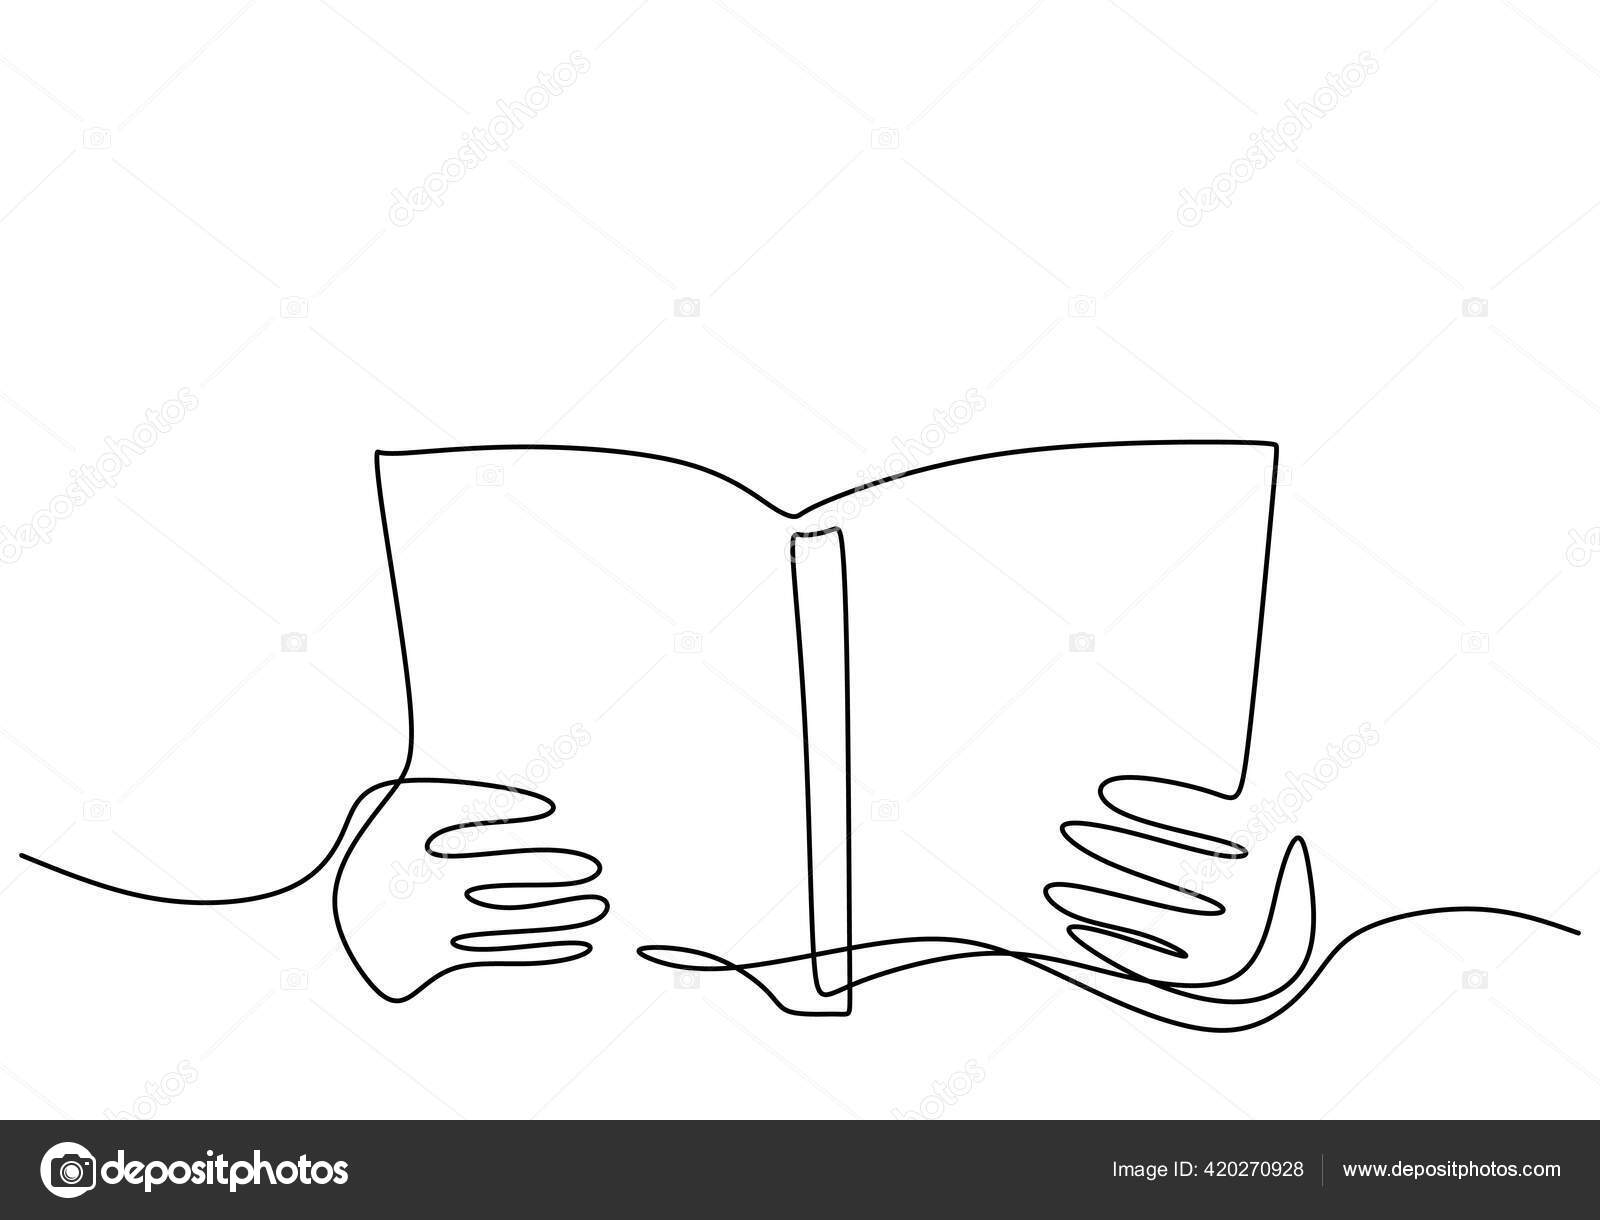 Open Book, Hand-drawing. Vector Illustration. Stock Vector